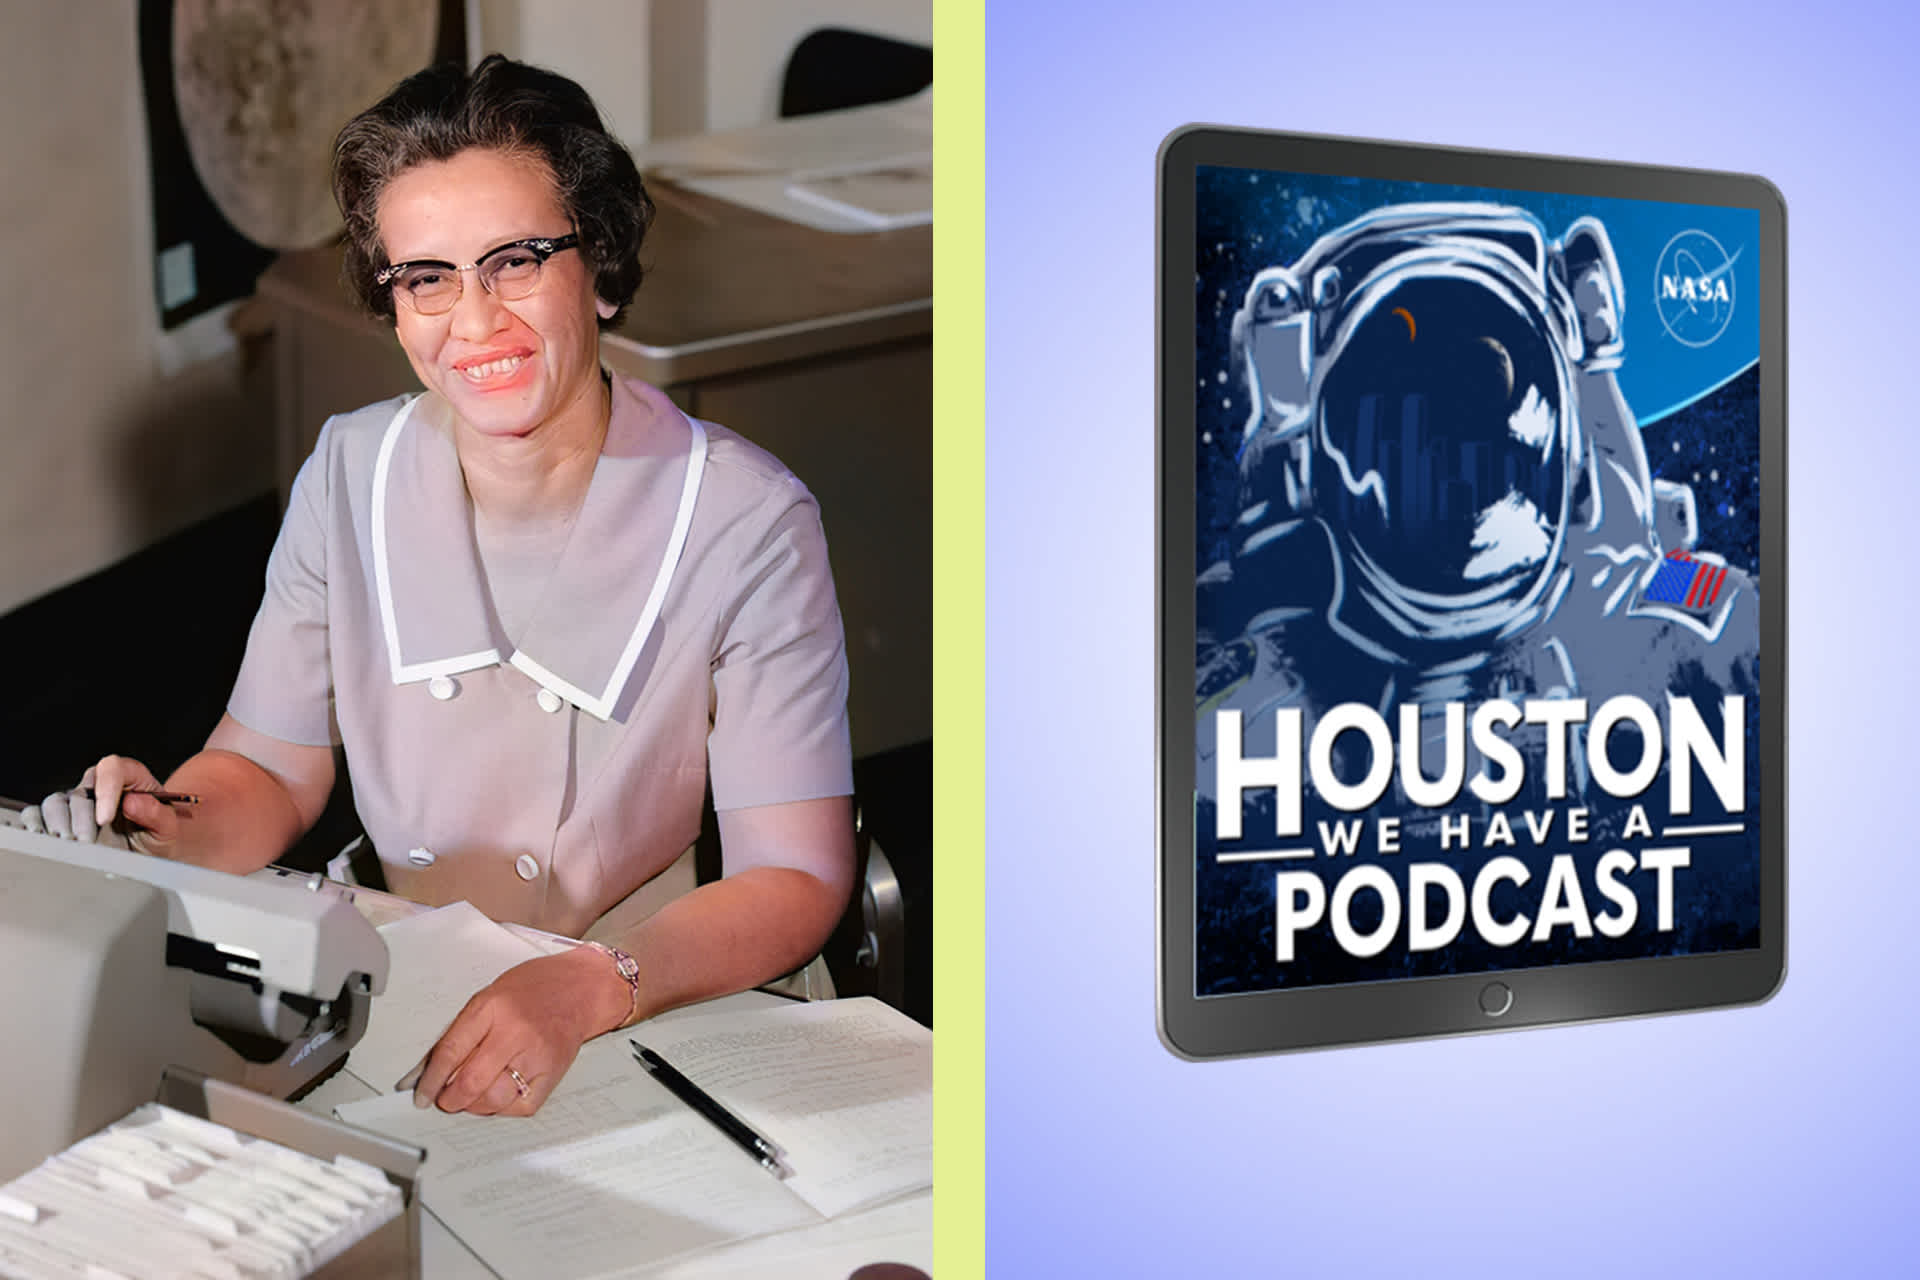 A side by side picture collage; image on the left is of a woman seated at a typewriter and the image on the right is a poster for the podcast "Houston We Have a Podcast".